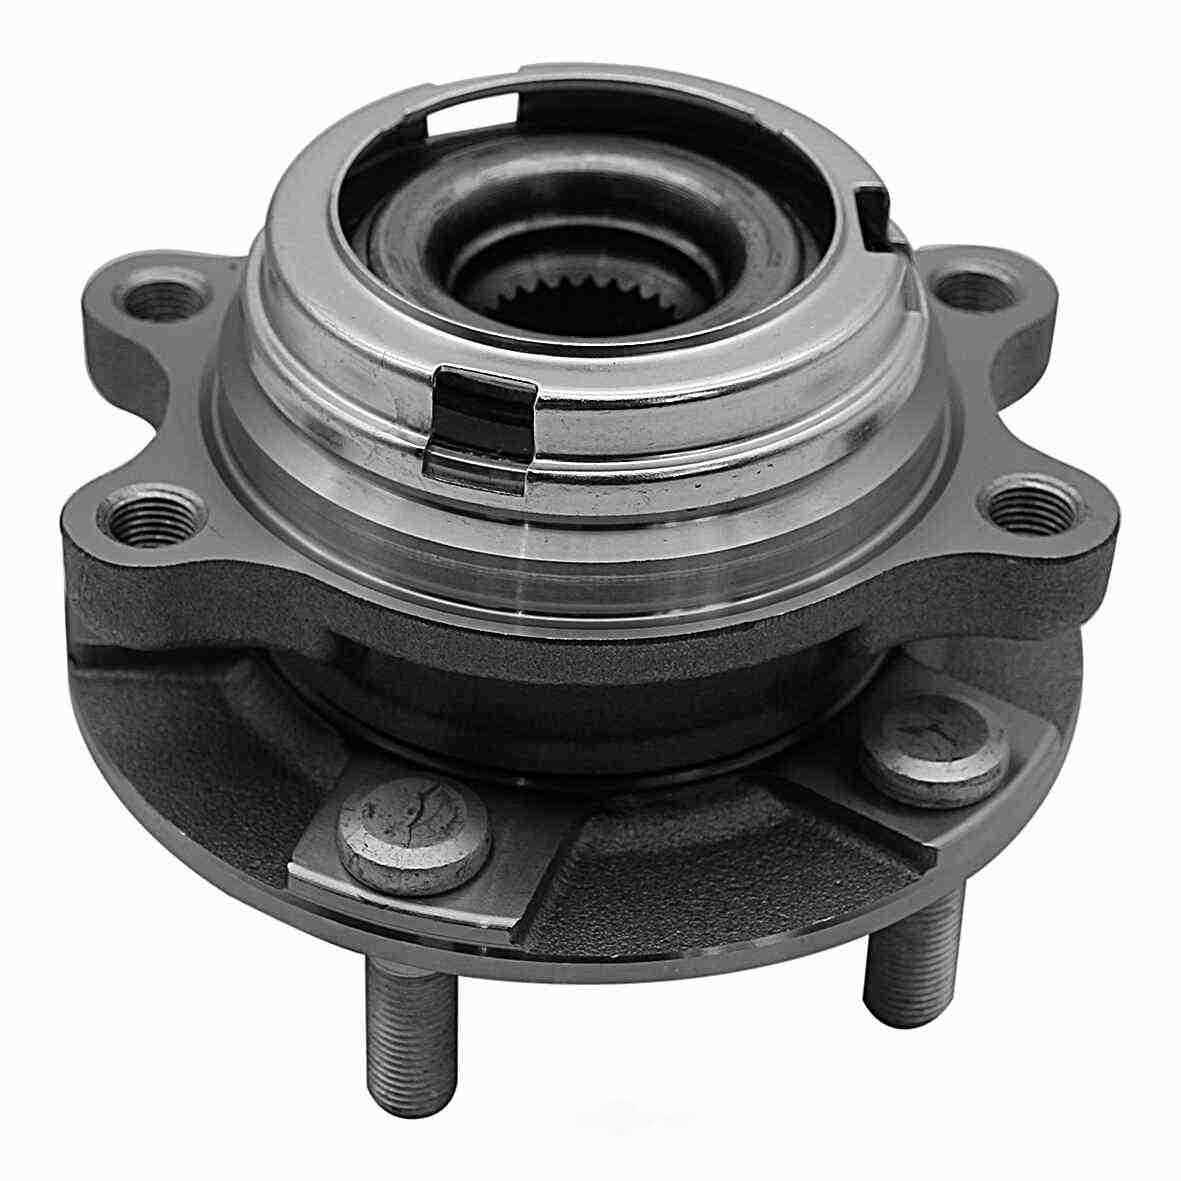 GSP NORTH AMERICA INC. - GSP Wheel Bearing Assembly - AD8 394335